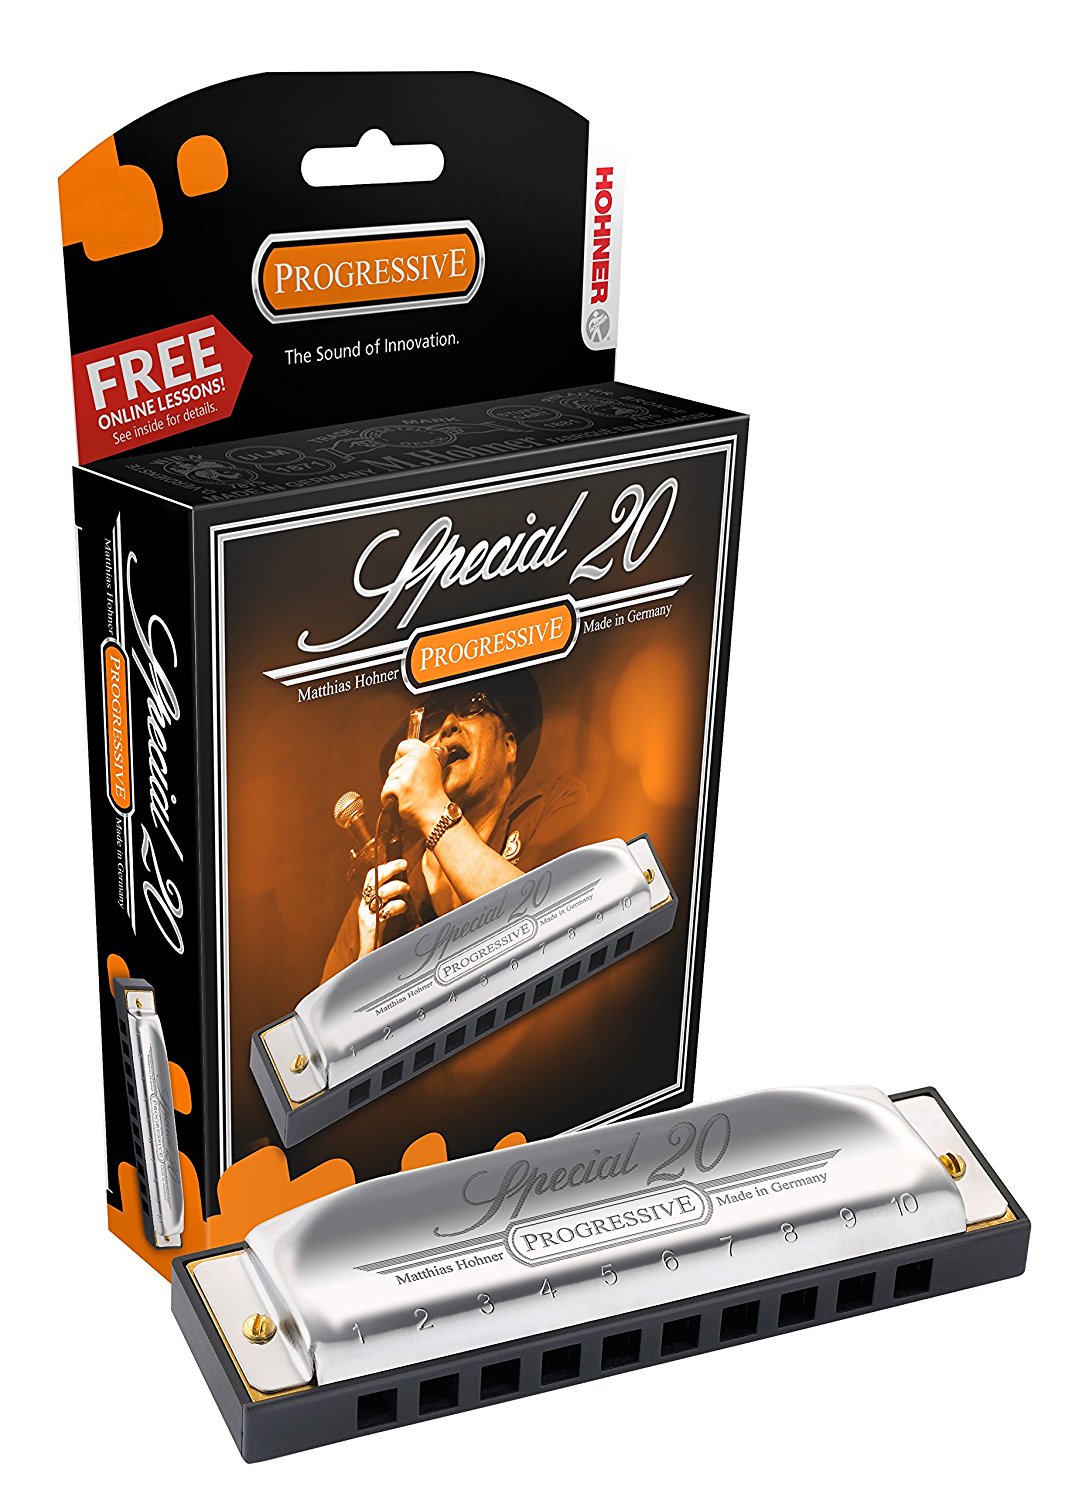 Hohner 560 Special 20 Harmonica - Key of G